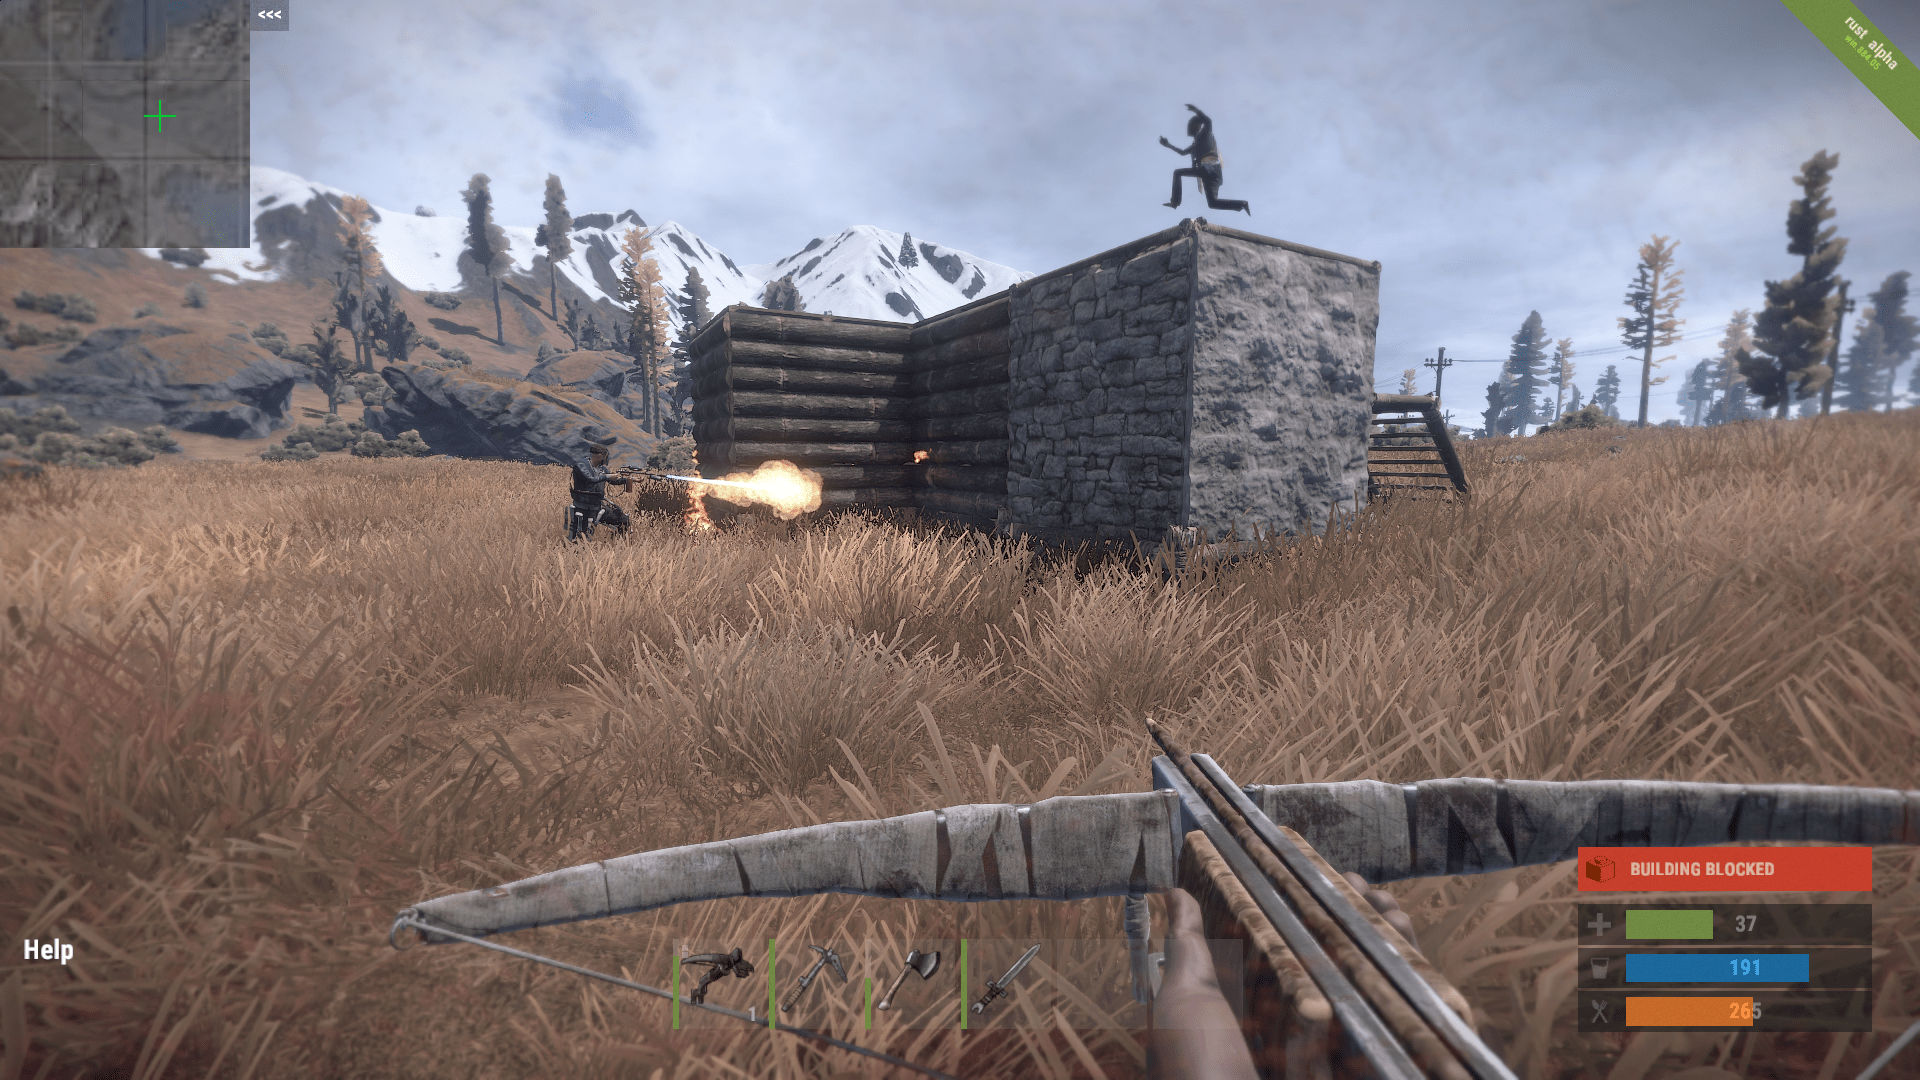 rust download free 2021